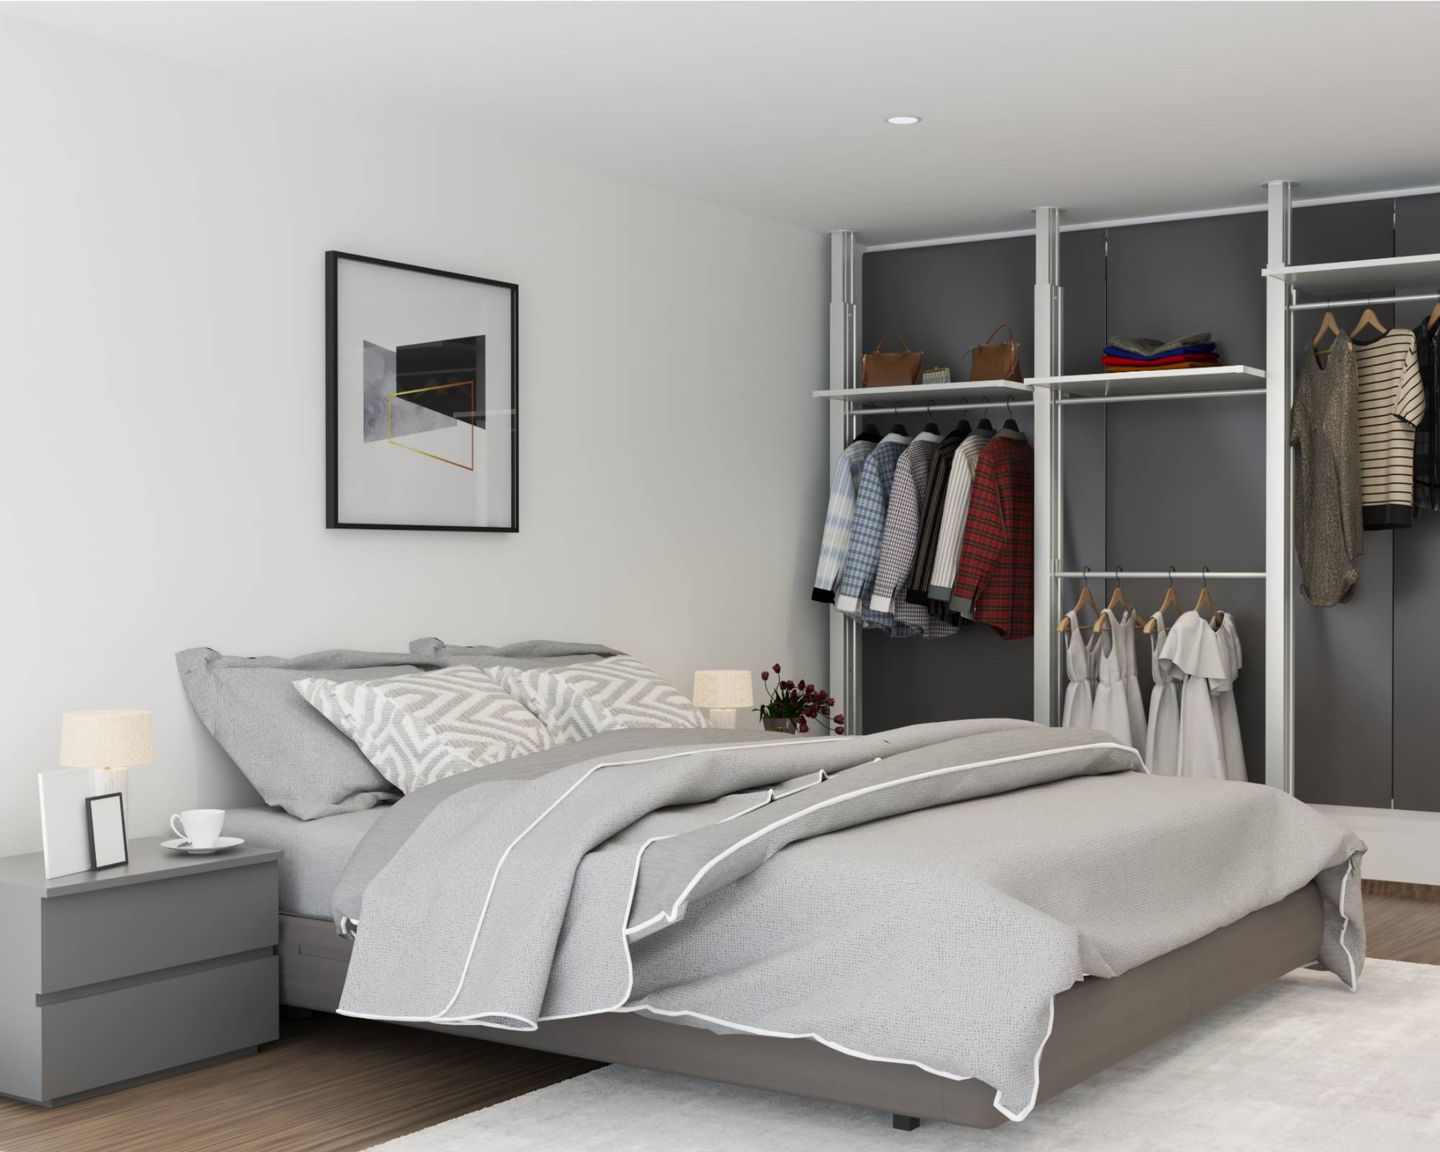 Compact Bedroom Design With A Queen Bed - Livspace